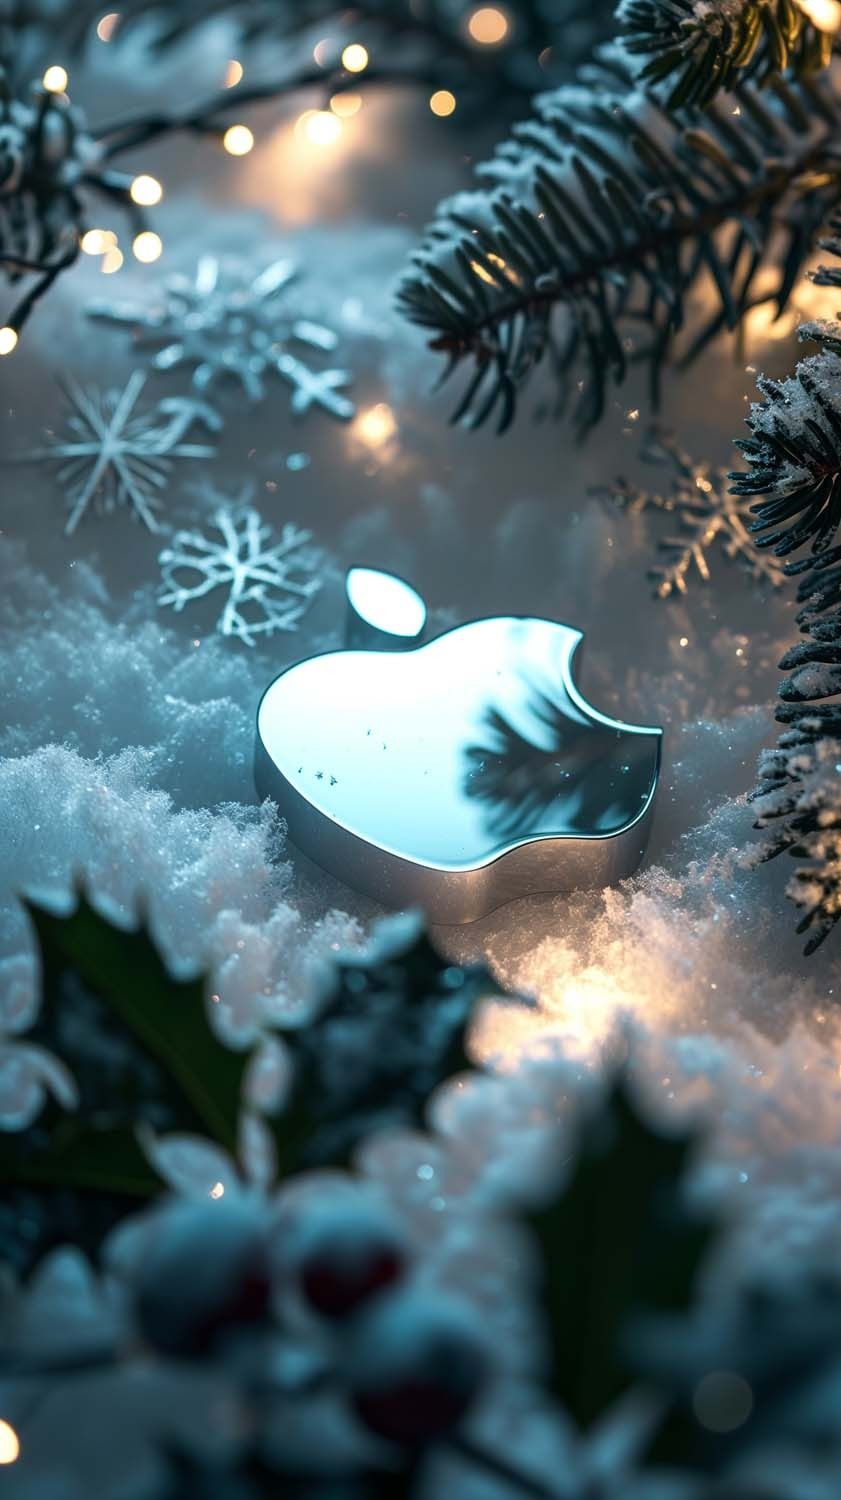 Apple Logo Christmas Time iPhone Wallpaper  iPhone Wallpapers